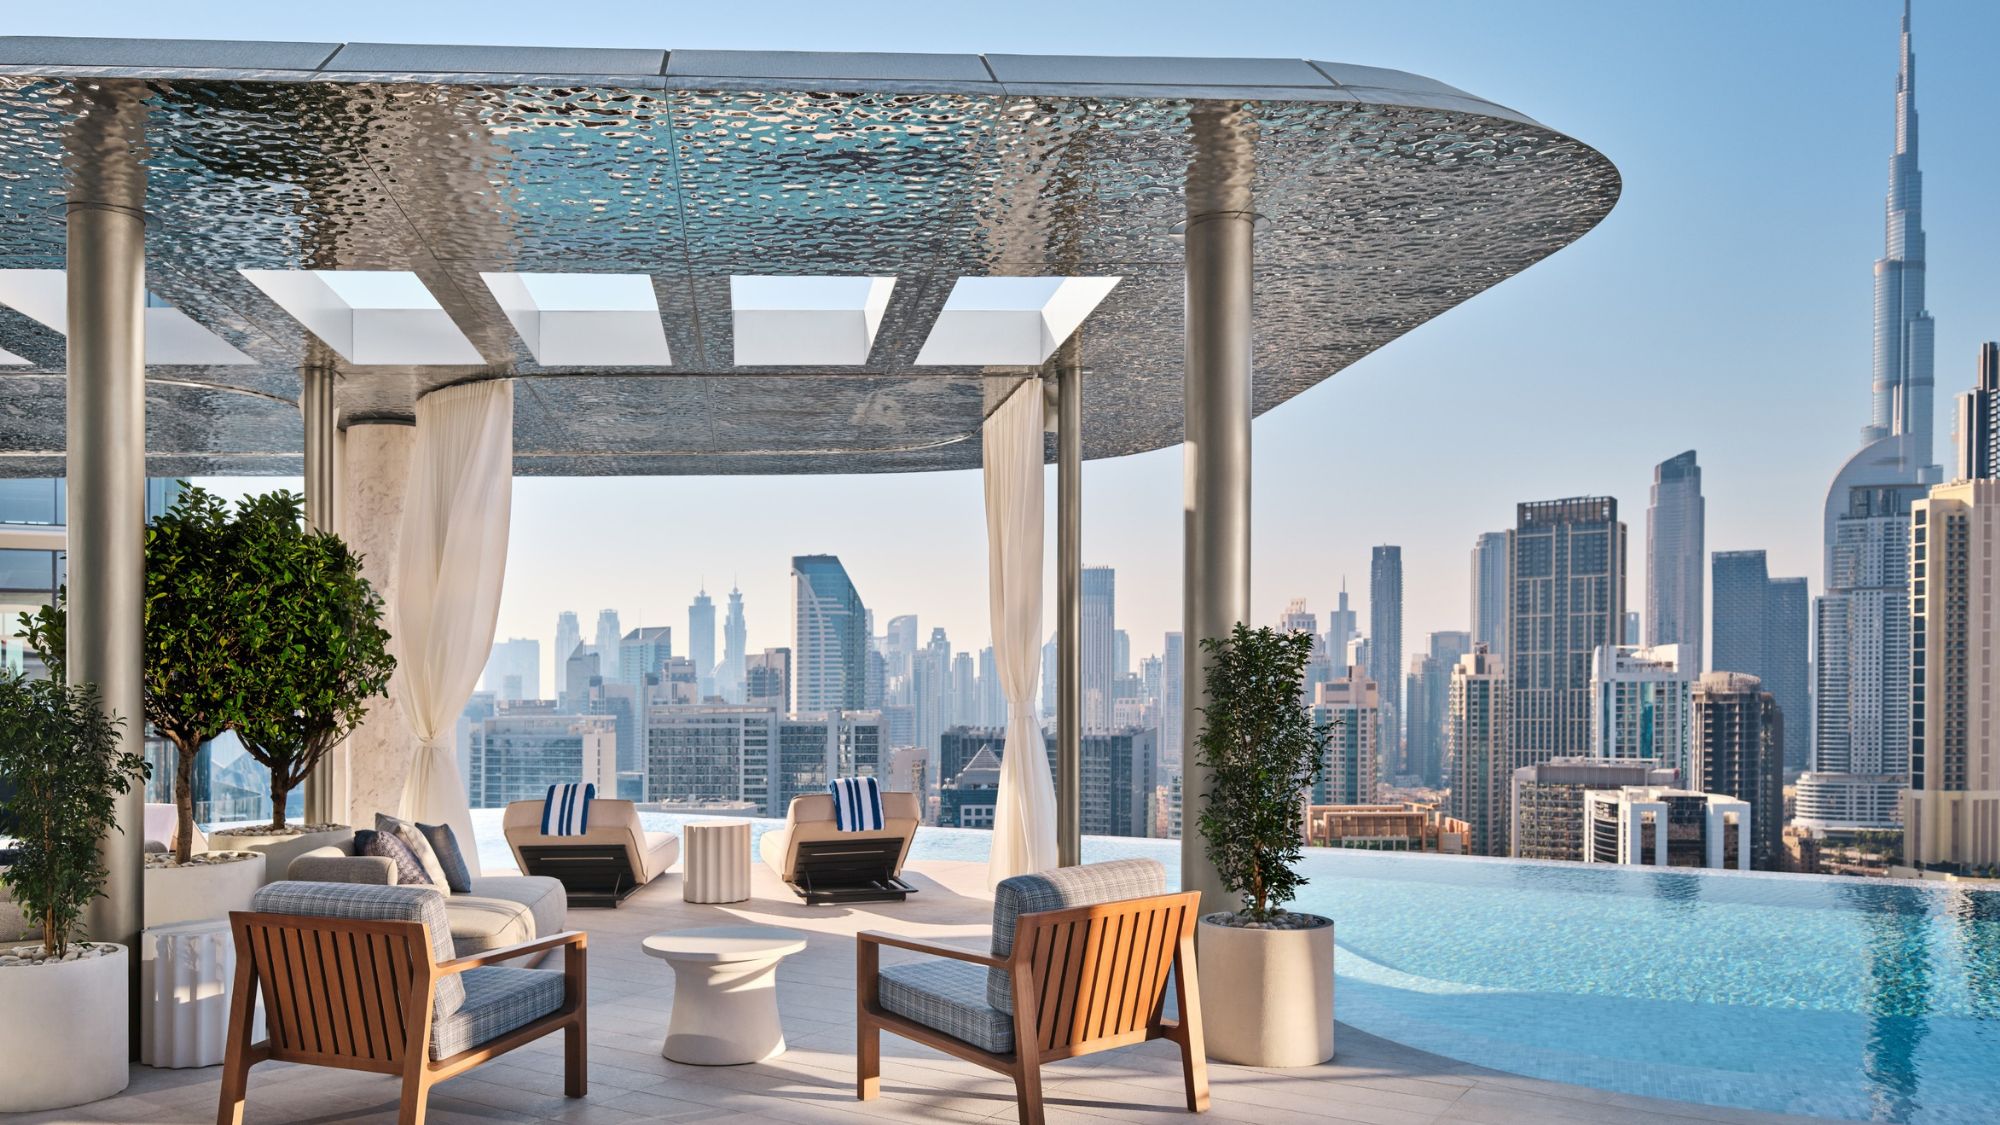  The Lana Dubai: elegance and refinement in this larger-than-life city 